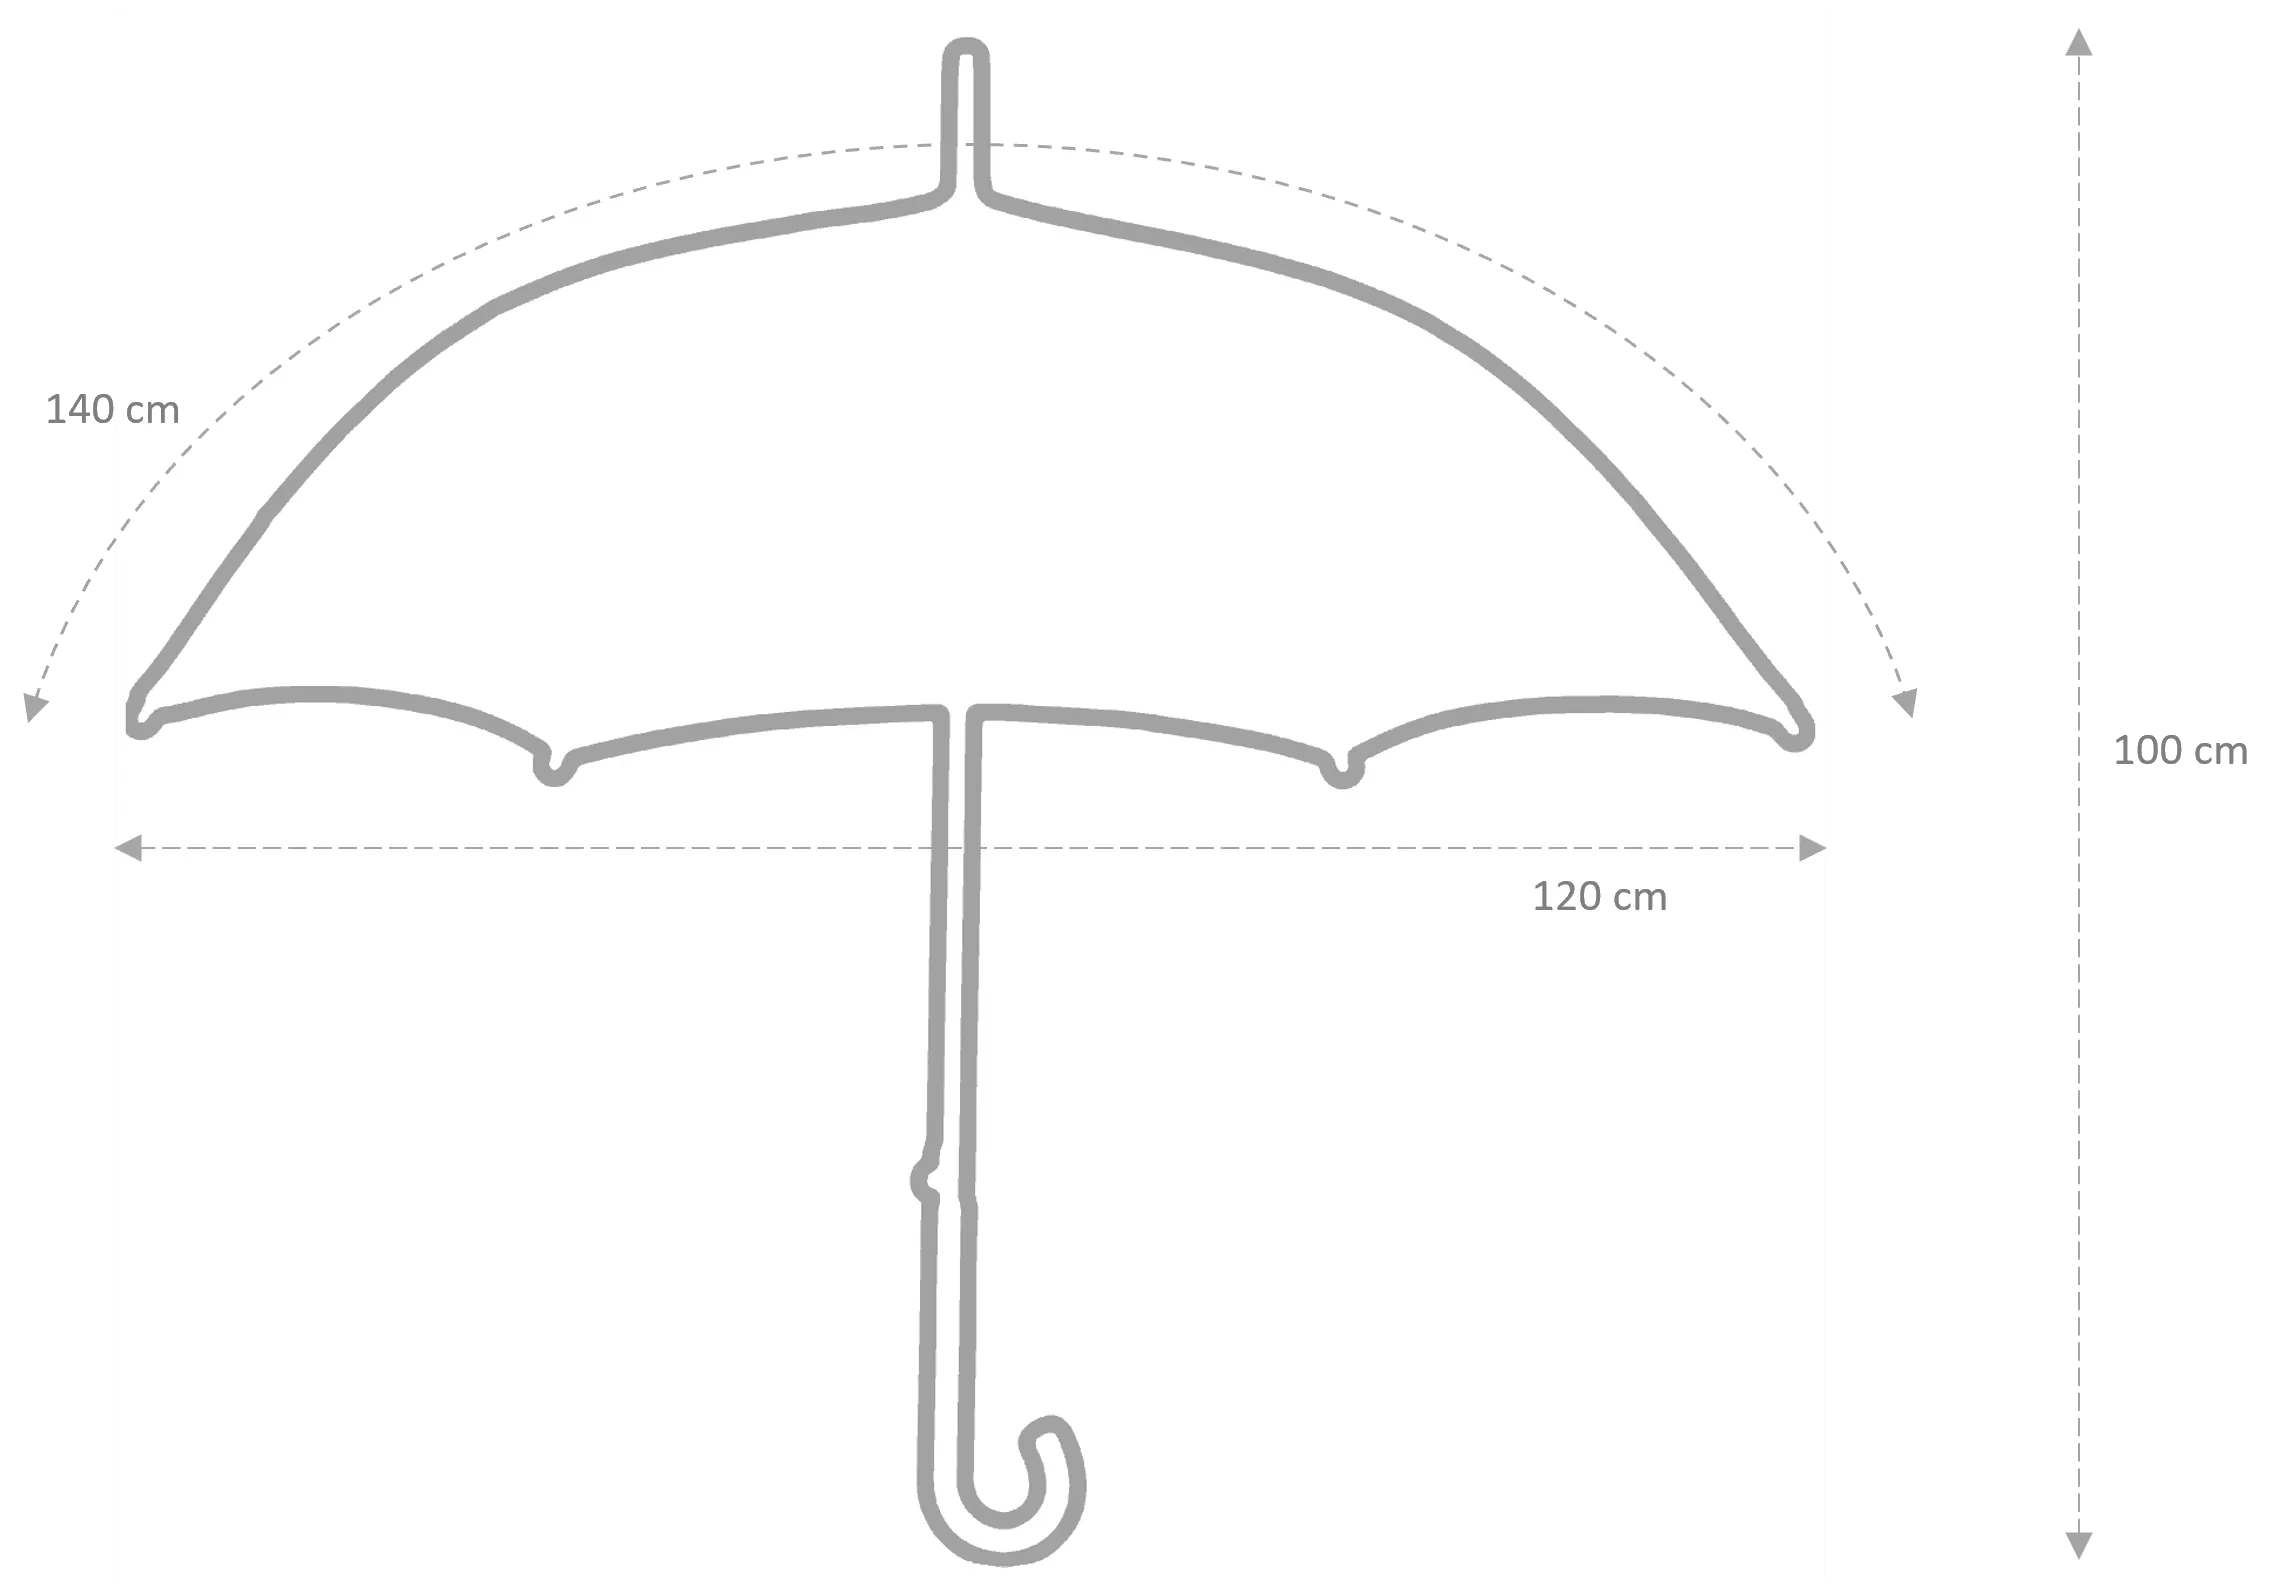 hidewise-london-umbrella-wooden-J-handle-strong-premium-quality-brolly-red-gust-proof-gustproof-automatic-straight-golf-size-professional-travel-elegant-sturdy-wind-proof-windproof-canopy-size